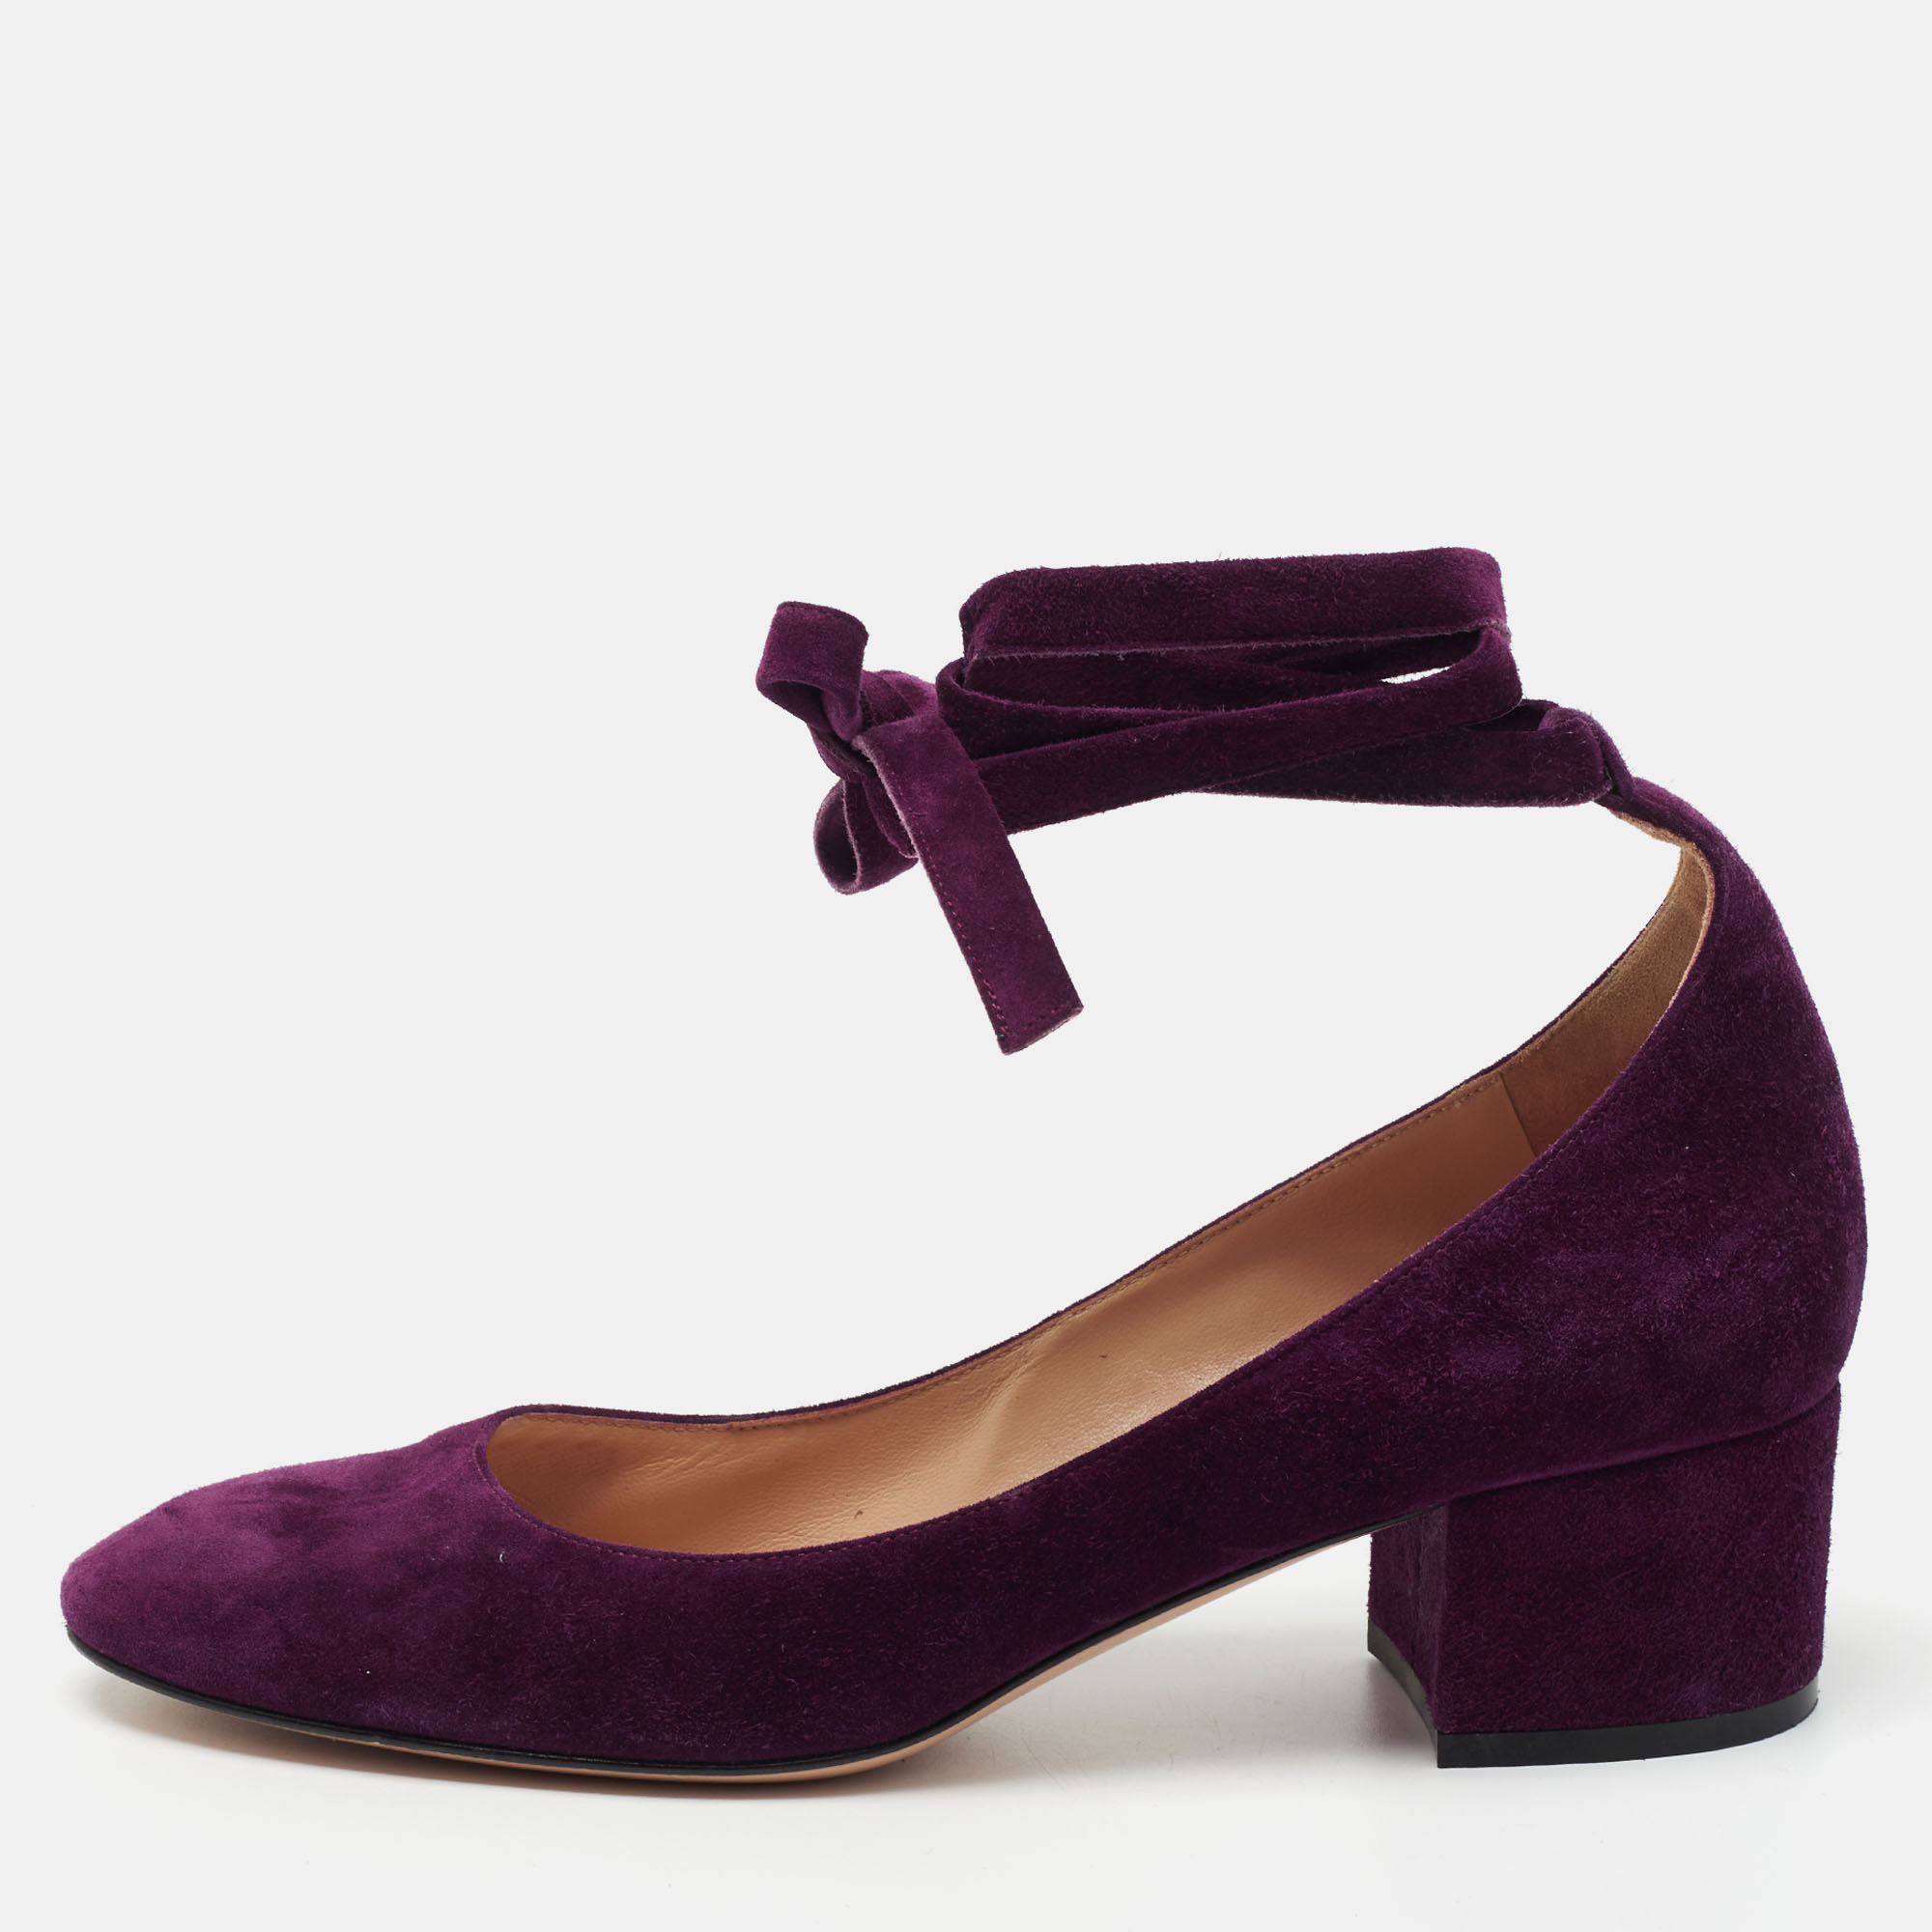 Pre-owned Gianvito Rossi Purple Suede Ankle Wrap Pumps Size 39.5